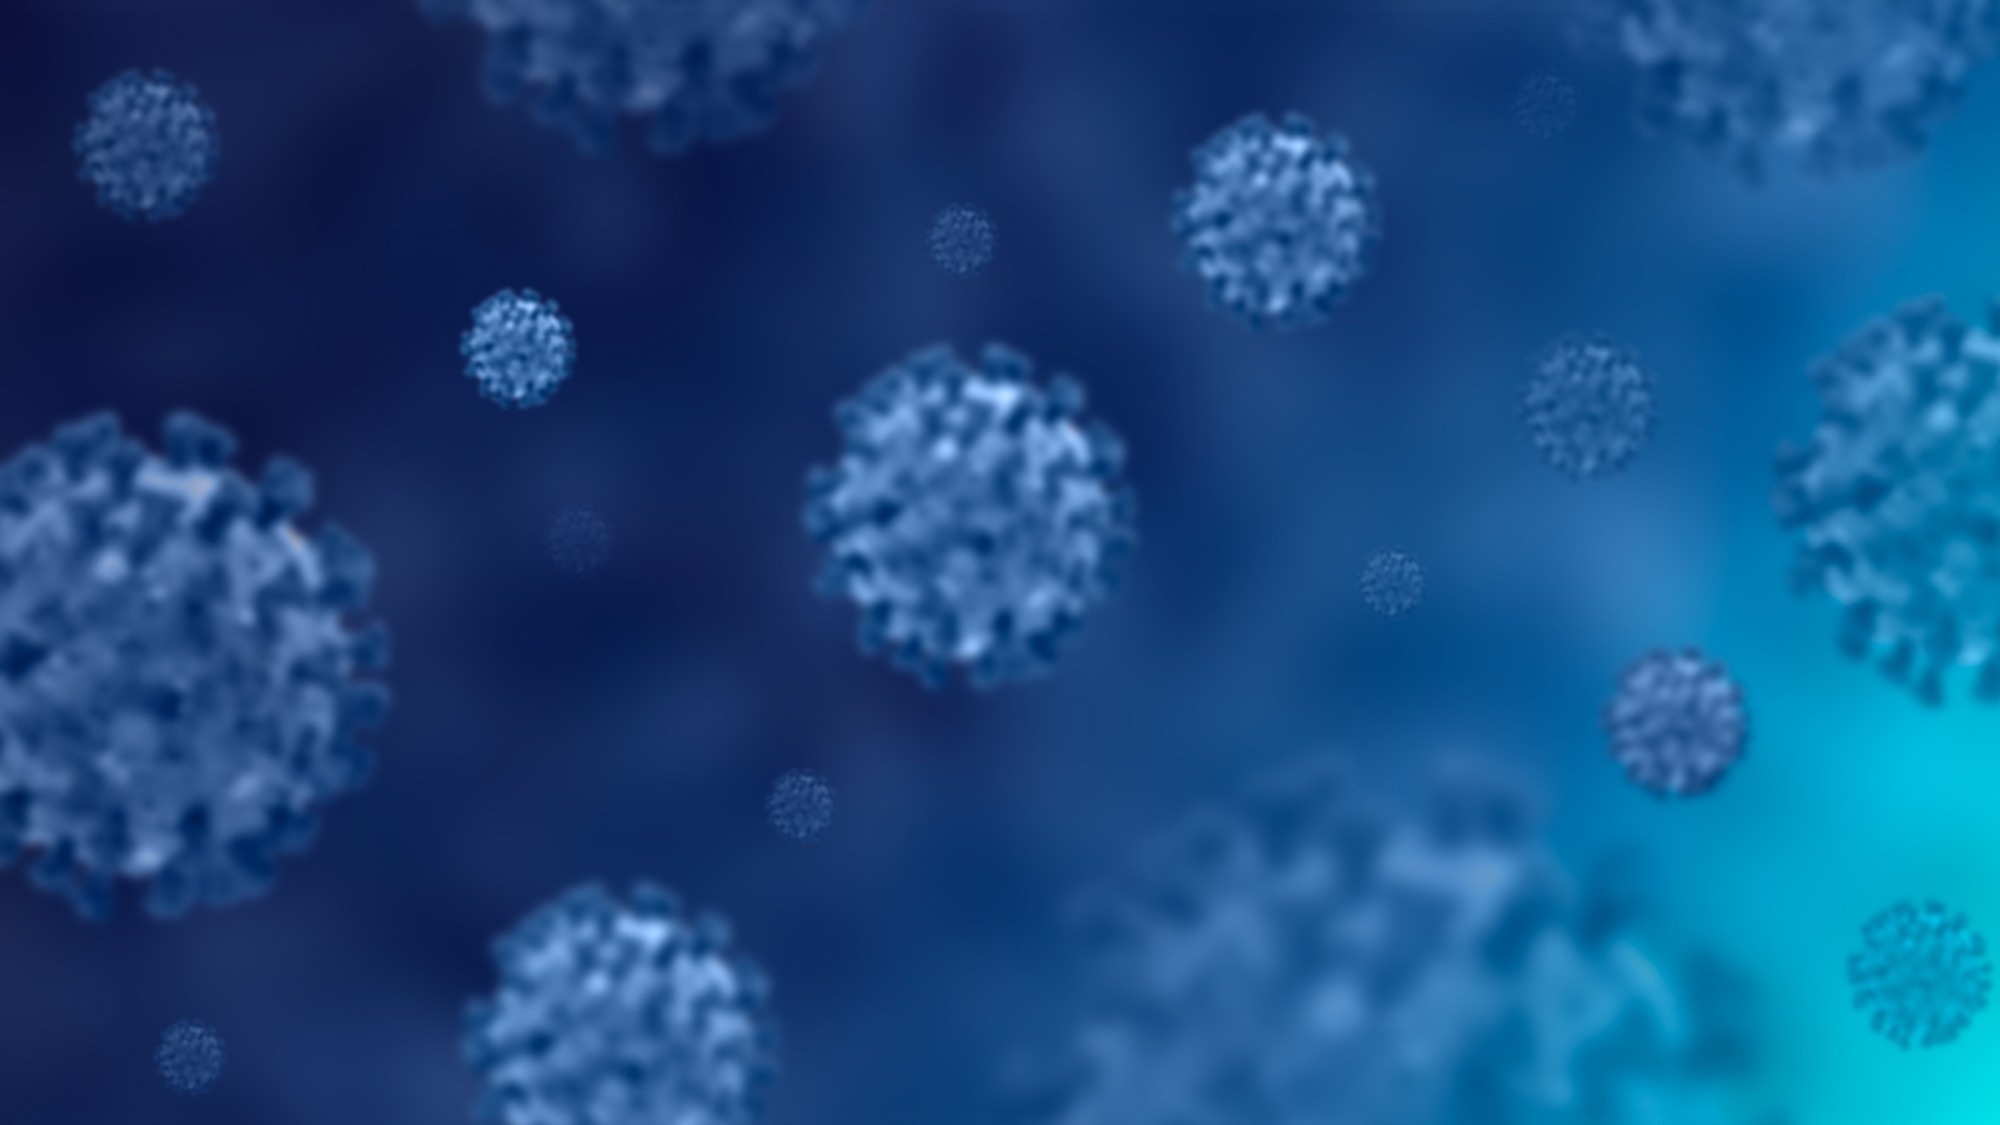 Study: Bacterial-induced or passively administered interferon gamma conditions the lung for early control of SARS-CoV-2. Image Credit: PrinceJoy/Shutterstock.com